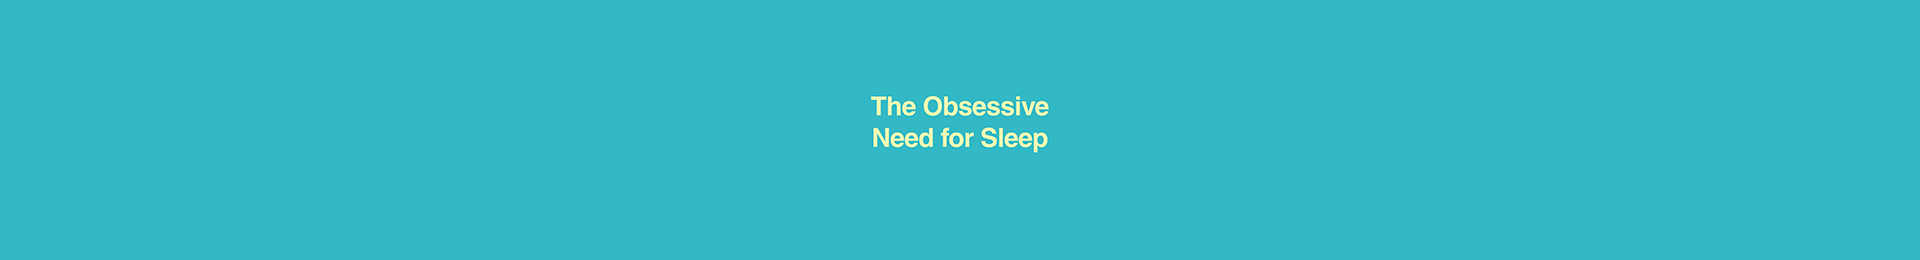 The Obsessive Need for Sleep banner